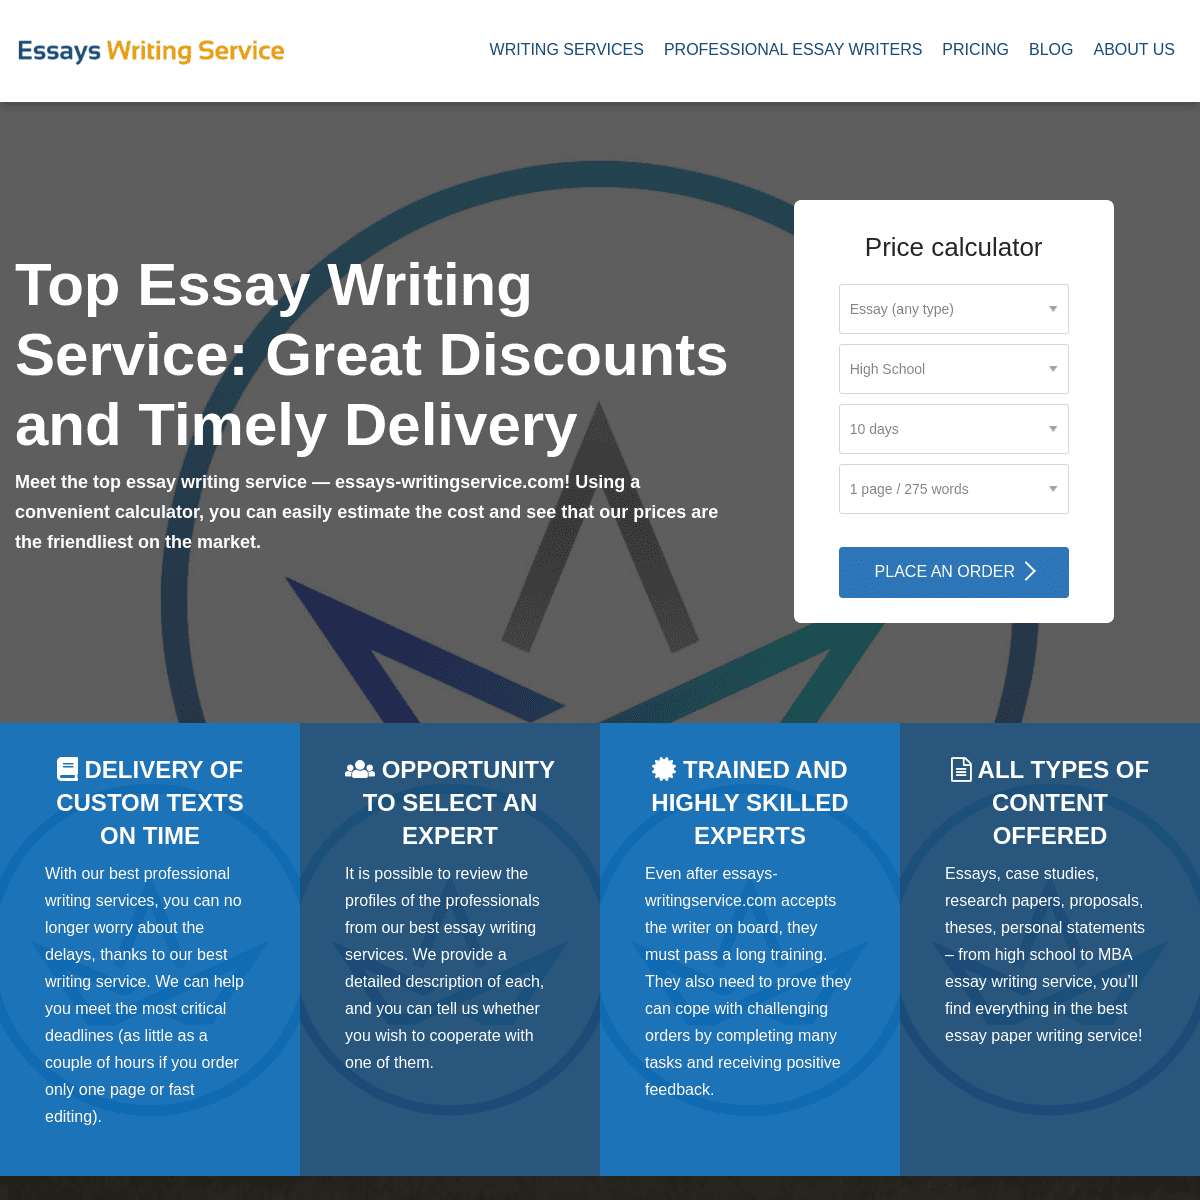 A complete backup of https://essays-writingservice.com